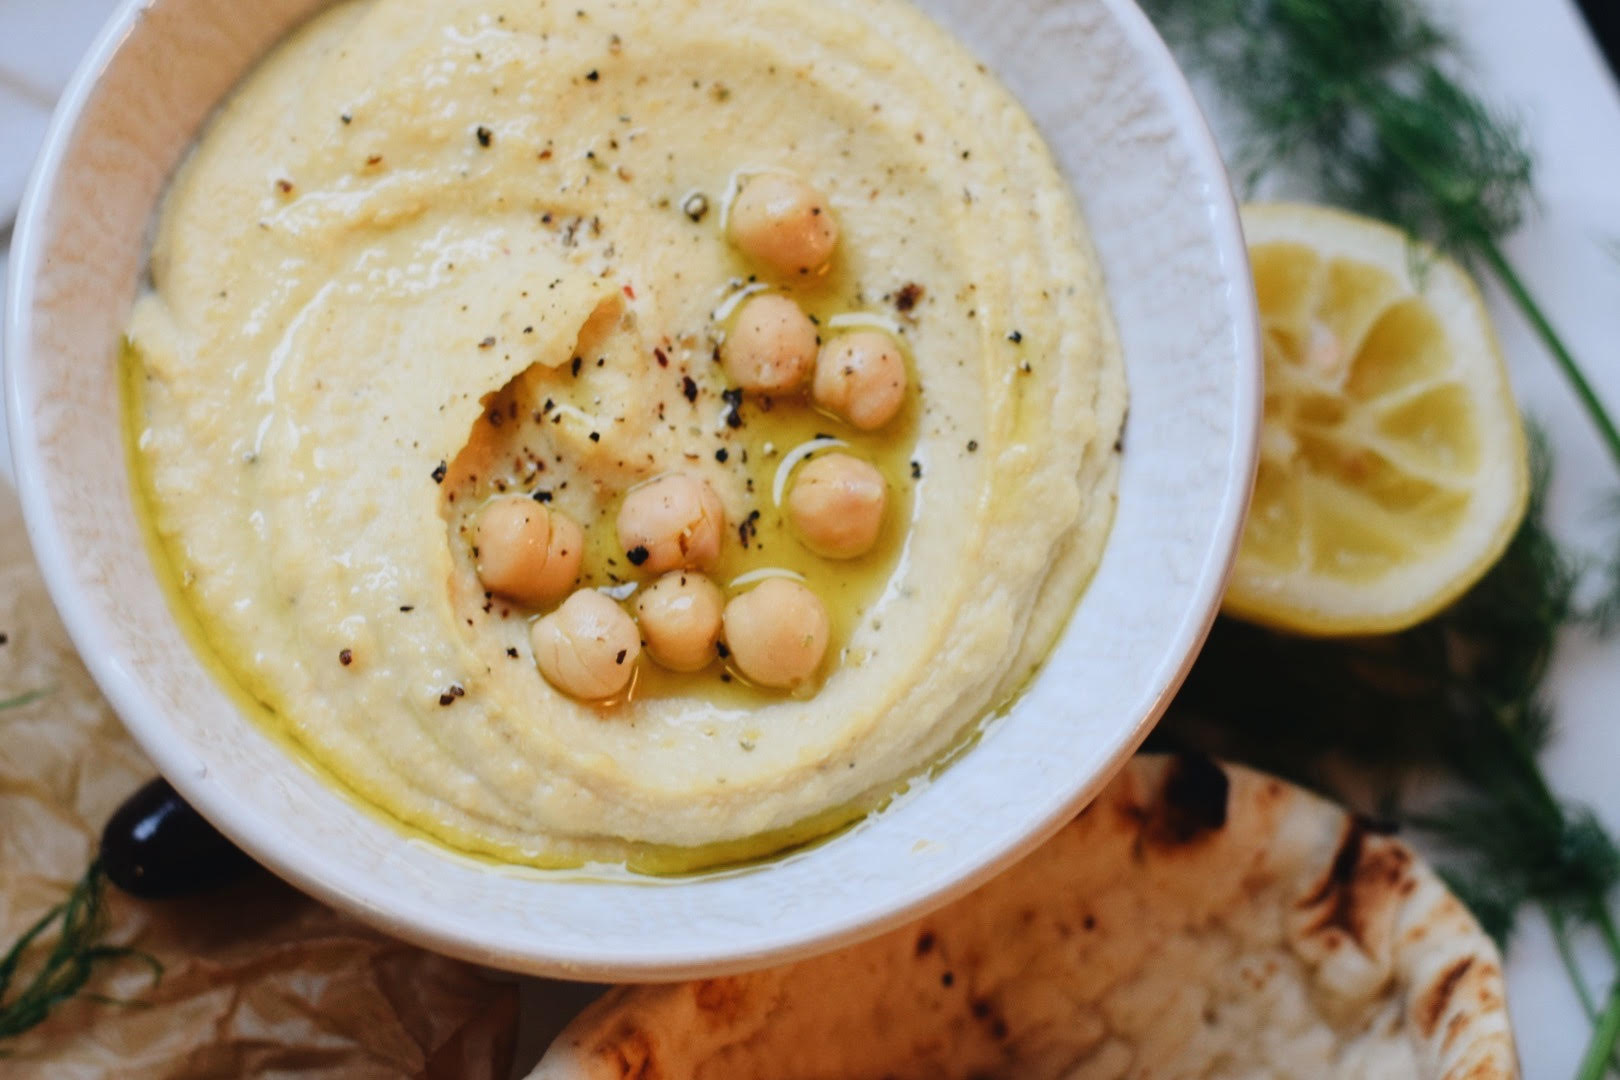 hummus topped with chickpeas